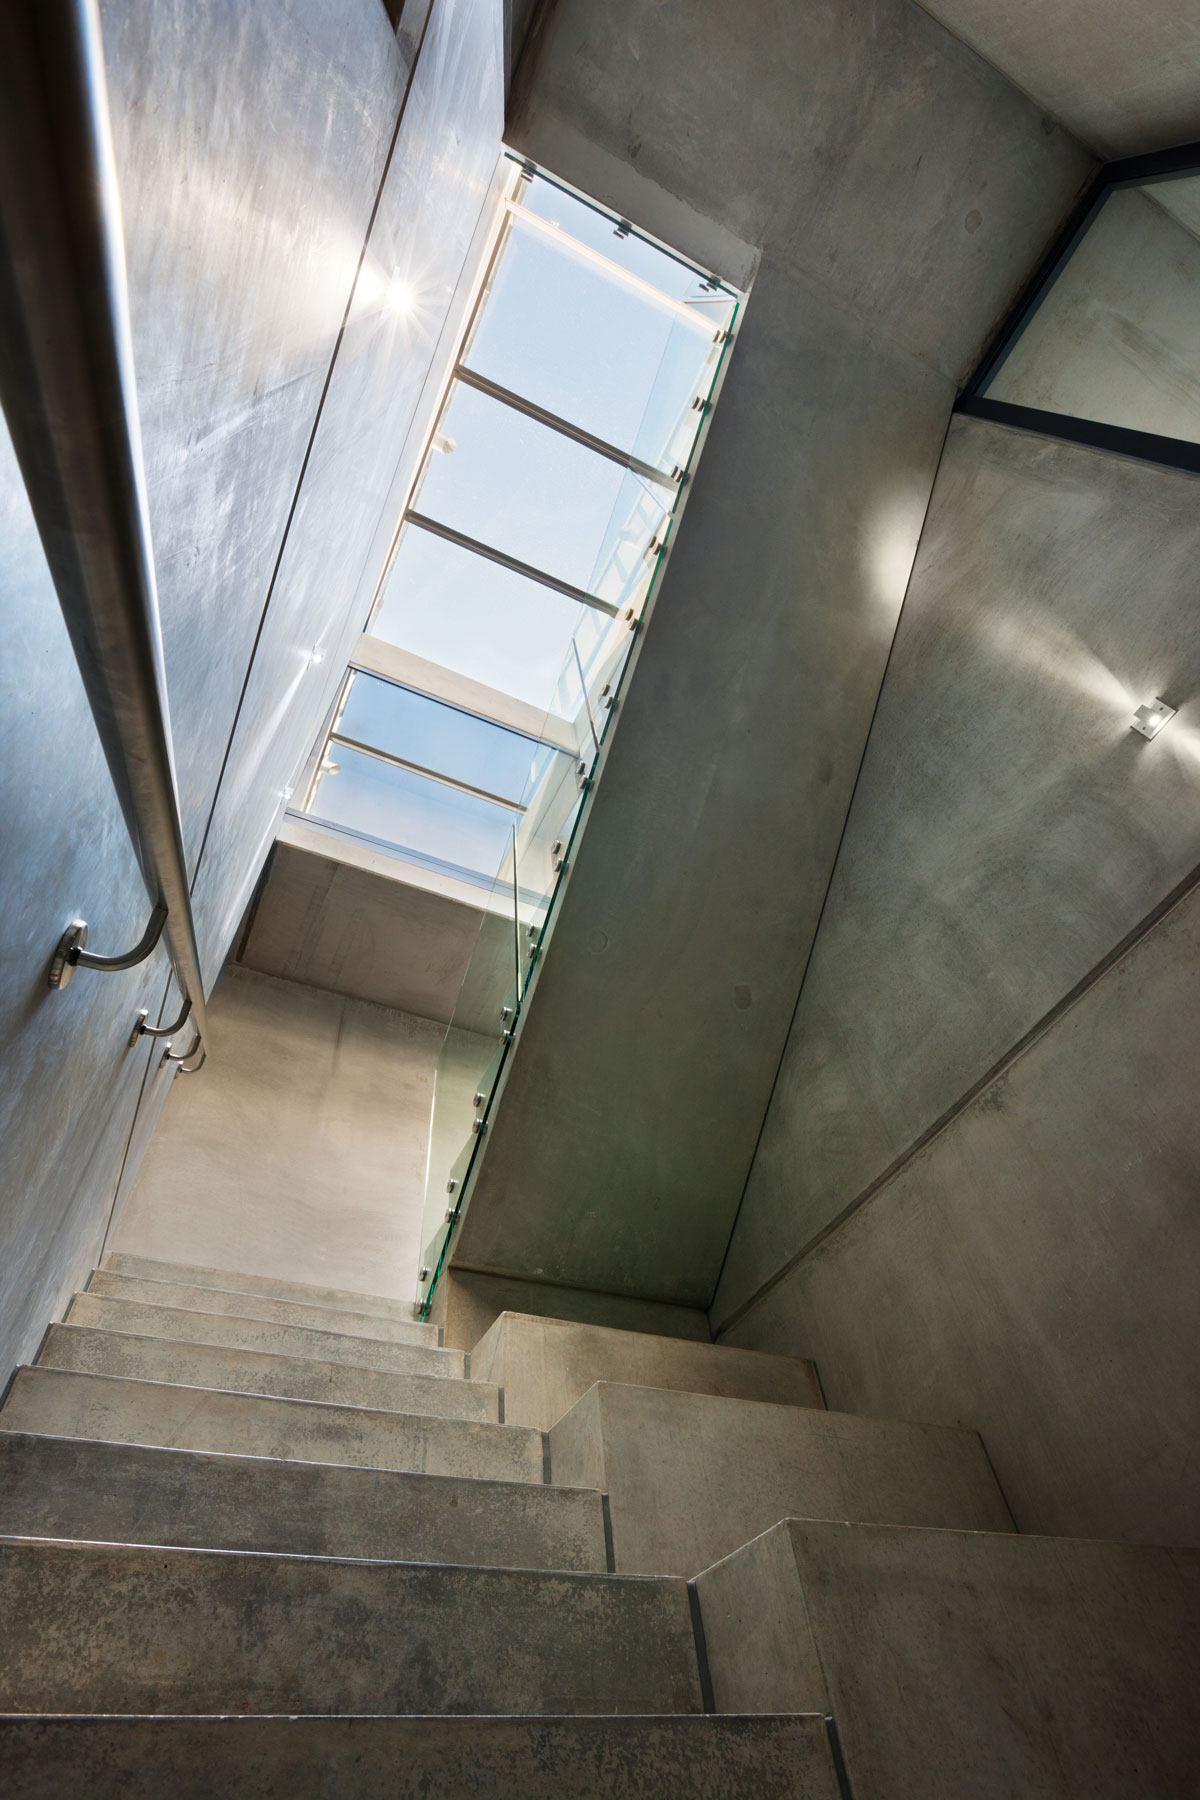 Hill Top House Project - Adrian James Architects, Oxford